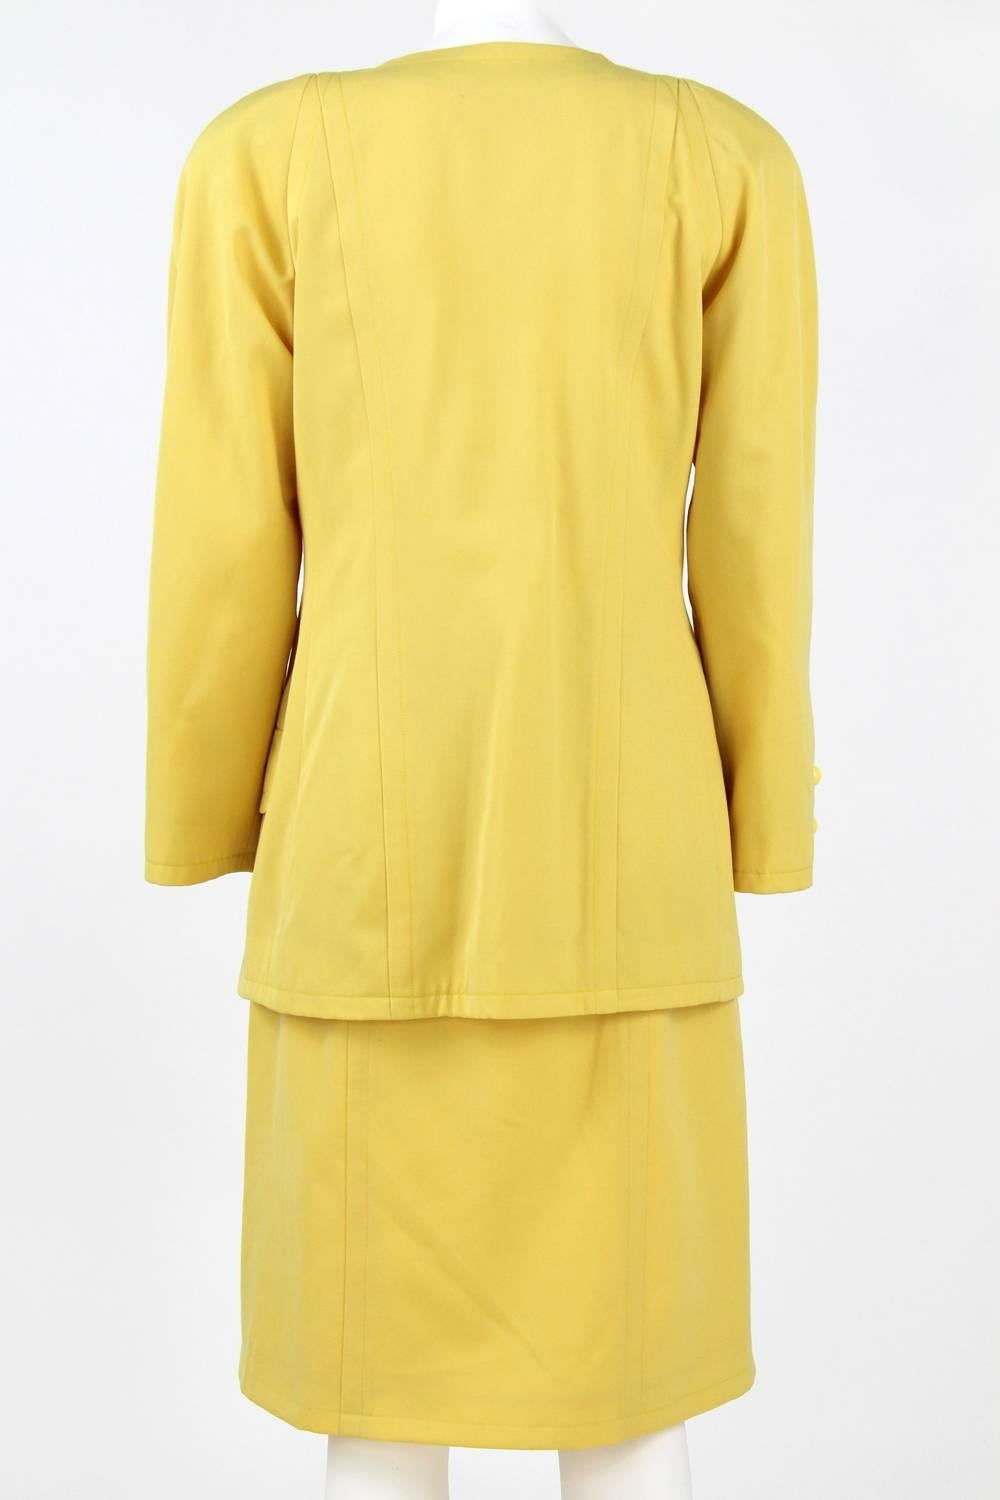 1980s Balenciaga Les Dix yellow wool skirt suit. The double breasted jacket features slit ends and shoulder pads. General good conditions.
Size: 40 FR.

Jacket:
length: 77 cm
sleeve: 55 cm
bust: 48 cm

Skirt:
length: 65 cm
waist:34 cm